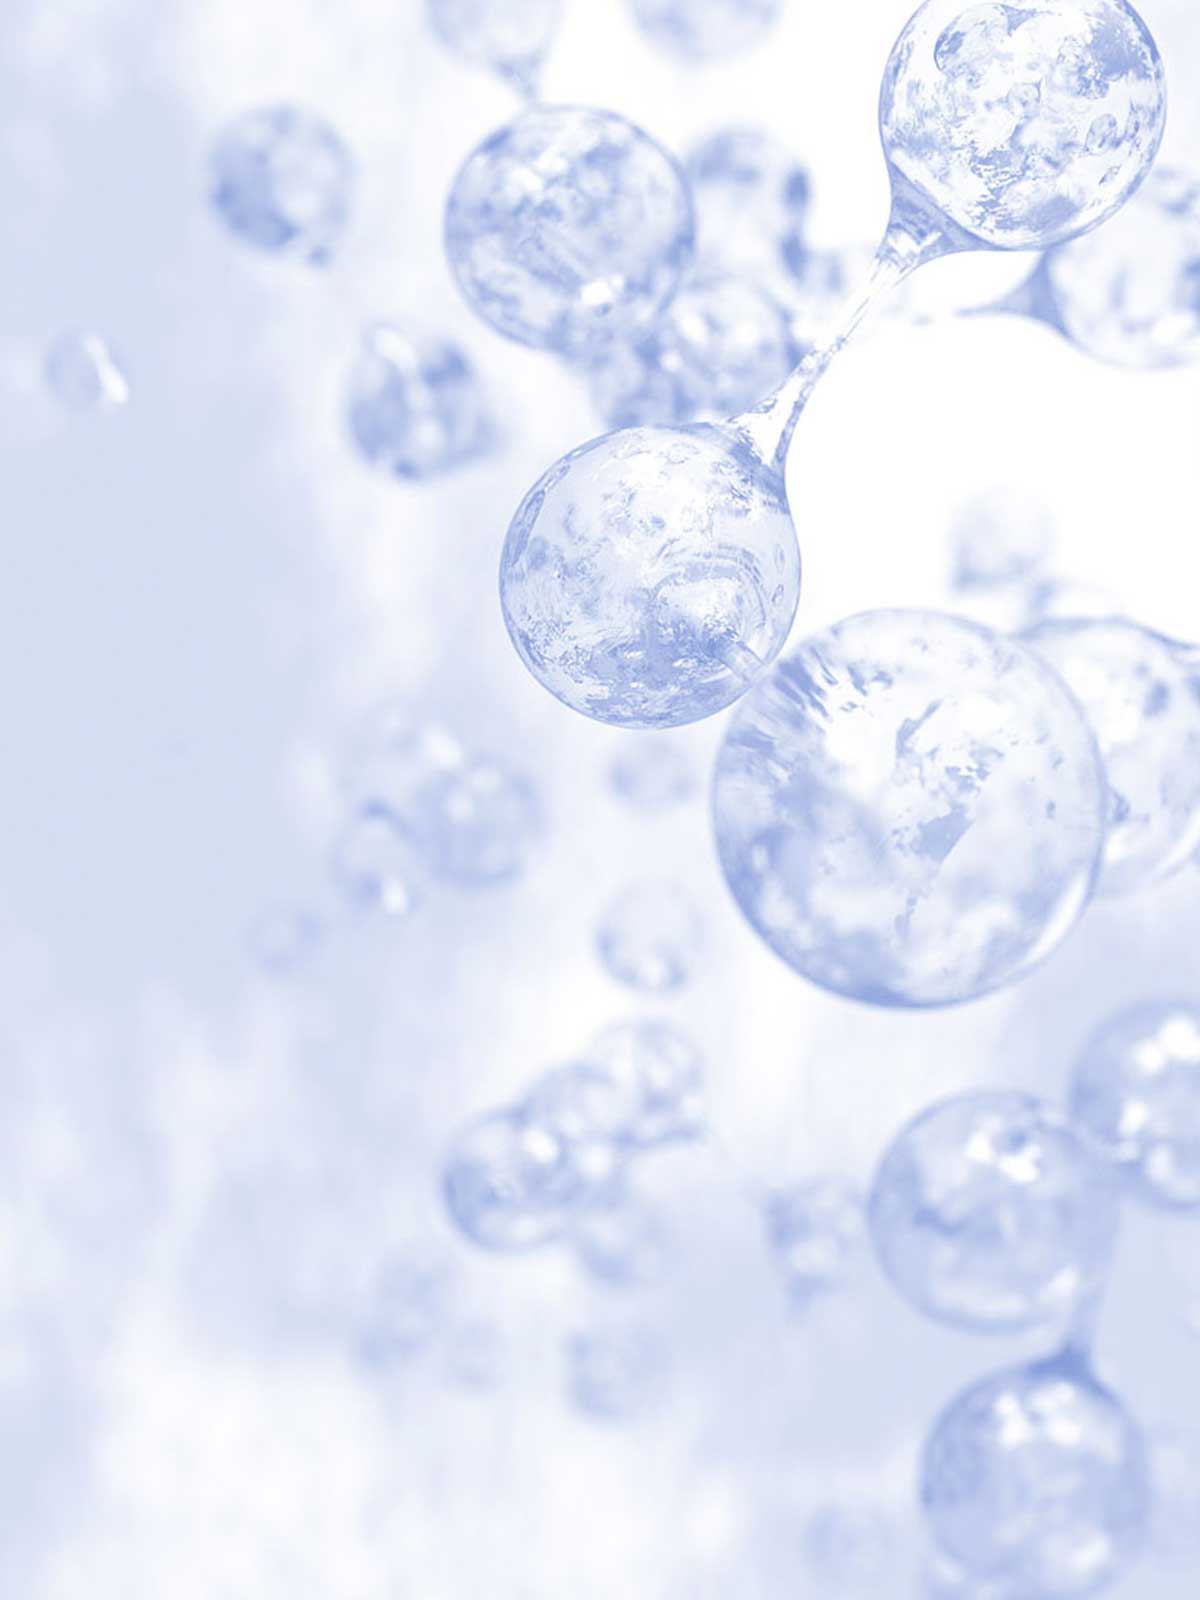 Water bubbles in the air photograph - water bubbles in the air fine art print.